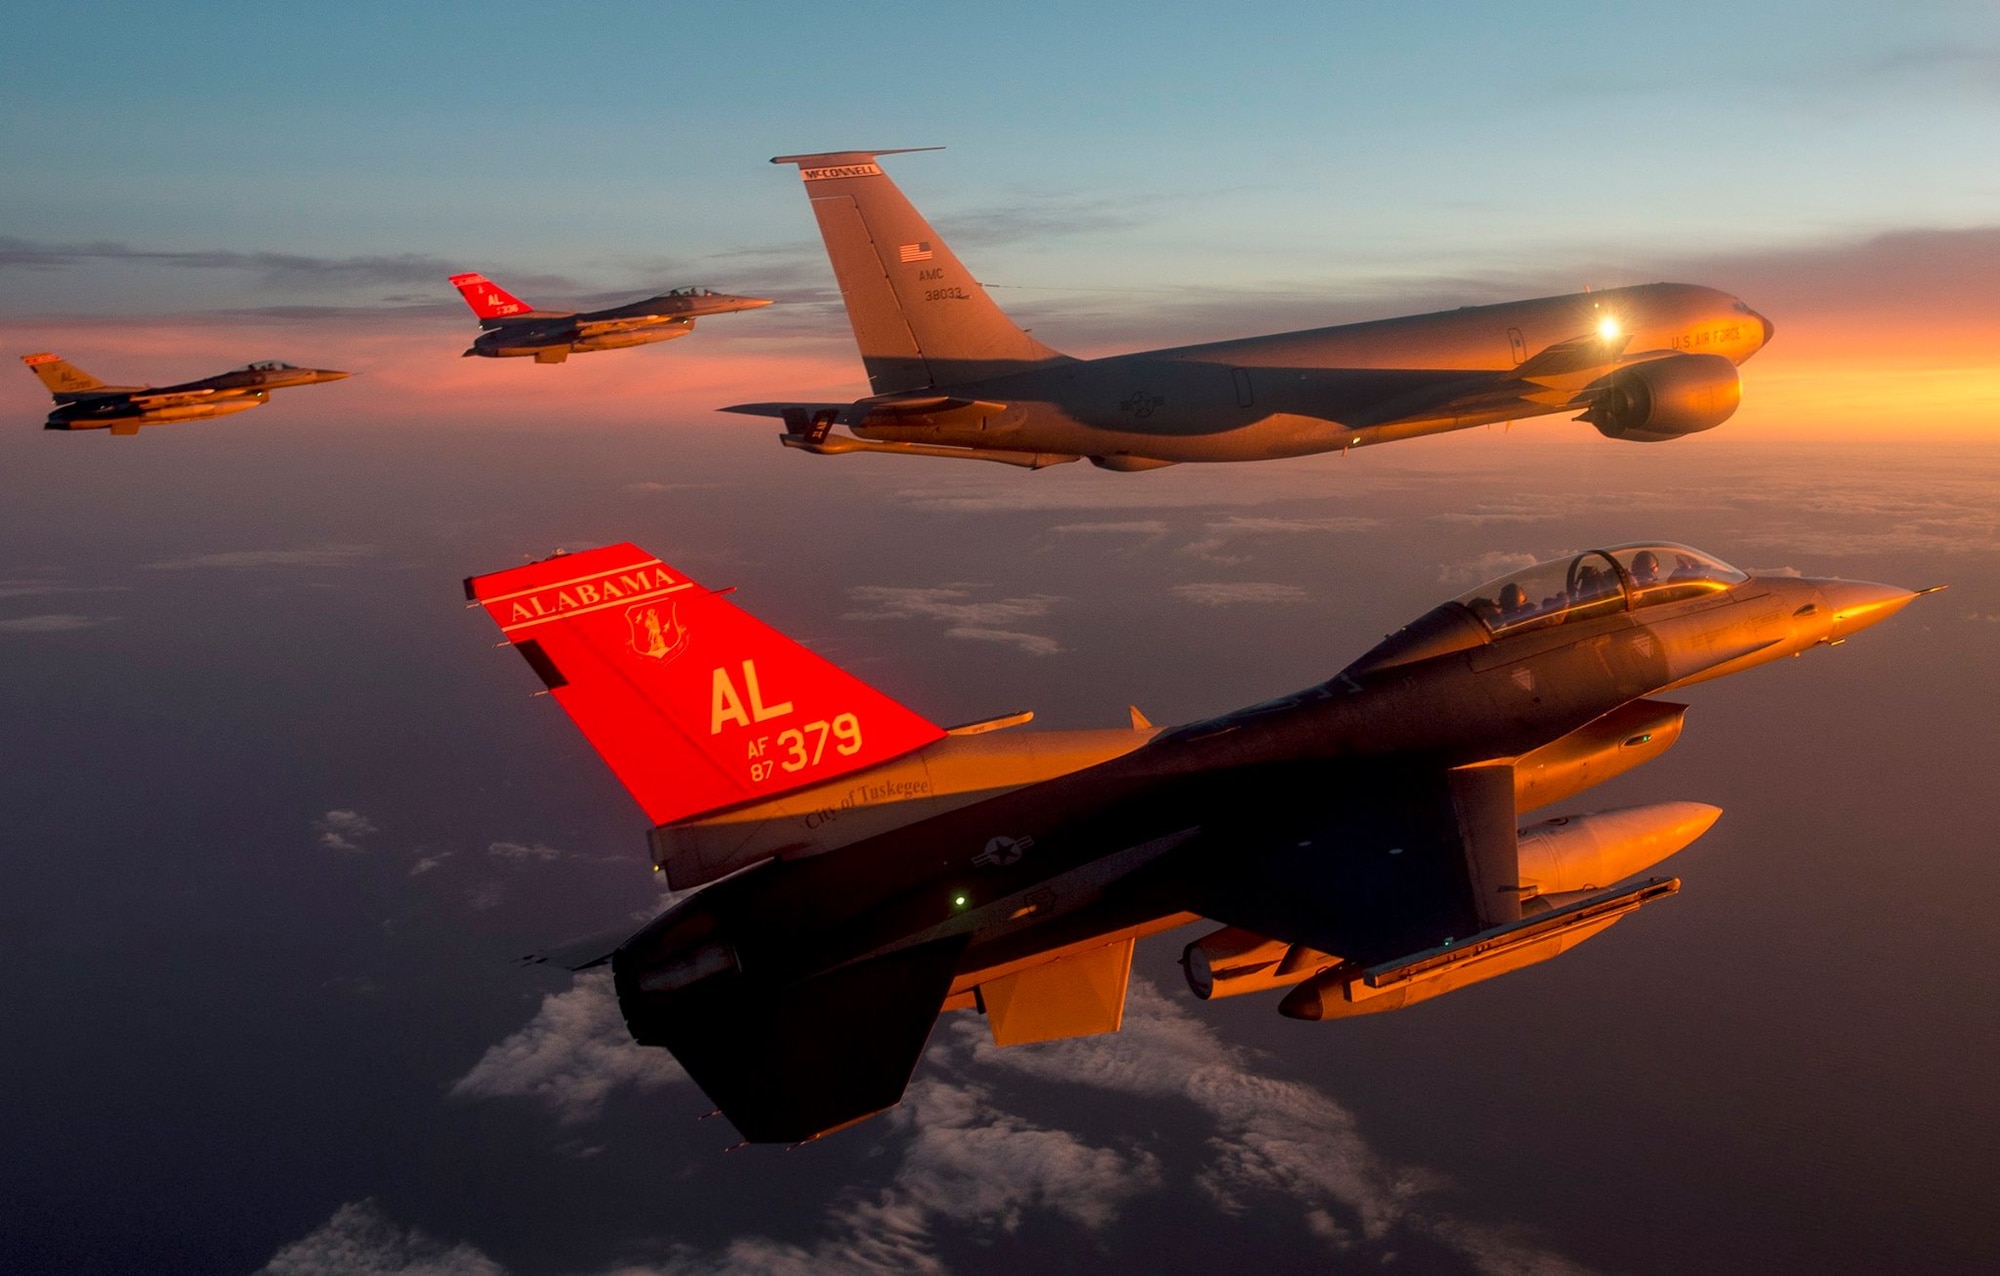 Alabama Air National Guard F-16 Fighting Falcons descend into Campia Turzii, Romania, Oct. 13, 2015, after flying from Montgomery, Alabama. Four F-16 Fighting Falcons and approximately 150 Airmen from the 187th Fighter Wing, Alabama Air National Guard participated in Dacian Viper, a training deployment to Romania designed to increase readiness to conduct combined air operations and to meet future security challenges. (U.S. Air Force photo by Staff Sgt. Matthew Bruch/Released)
